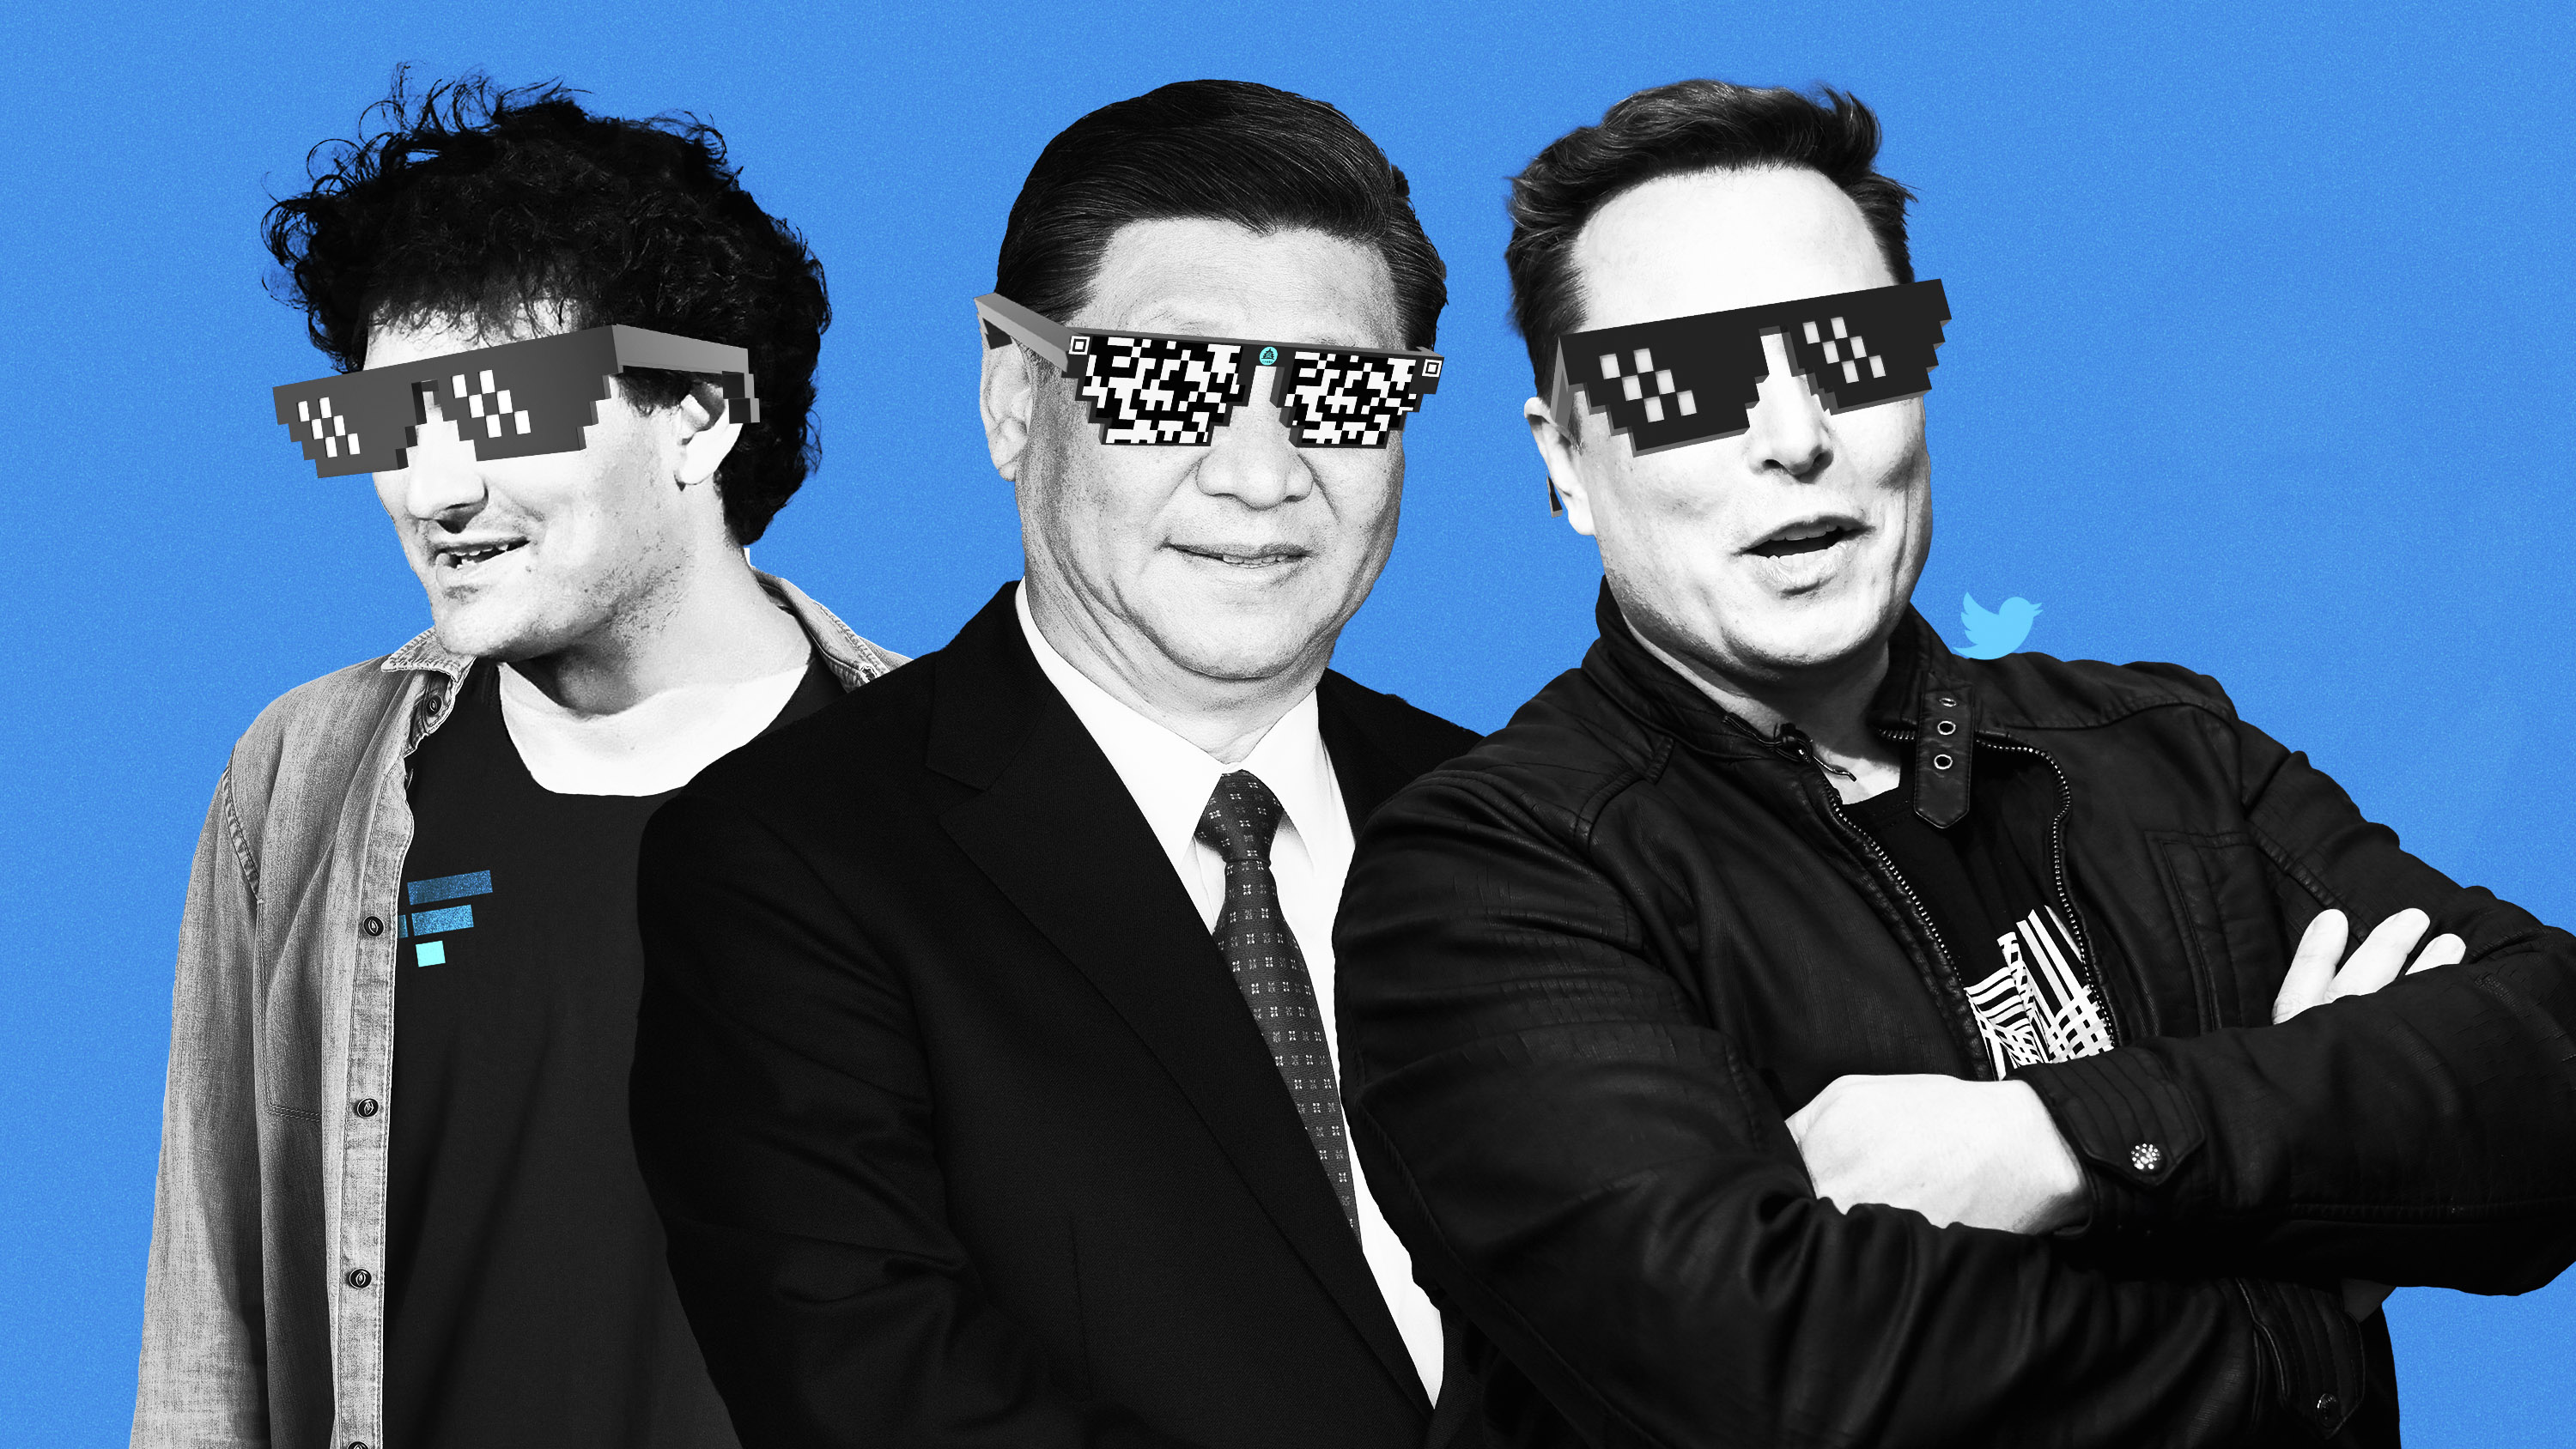 Sam bankman-Fried, Xi Jinping, and Elon Musk with &quot;deal with it&quot; sunglasses